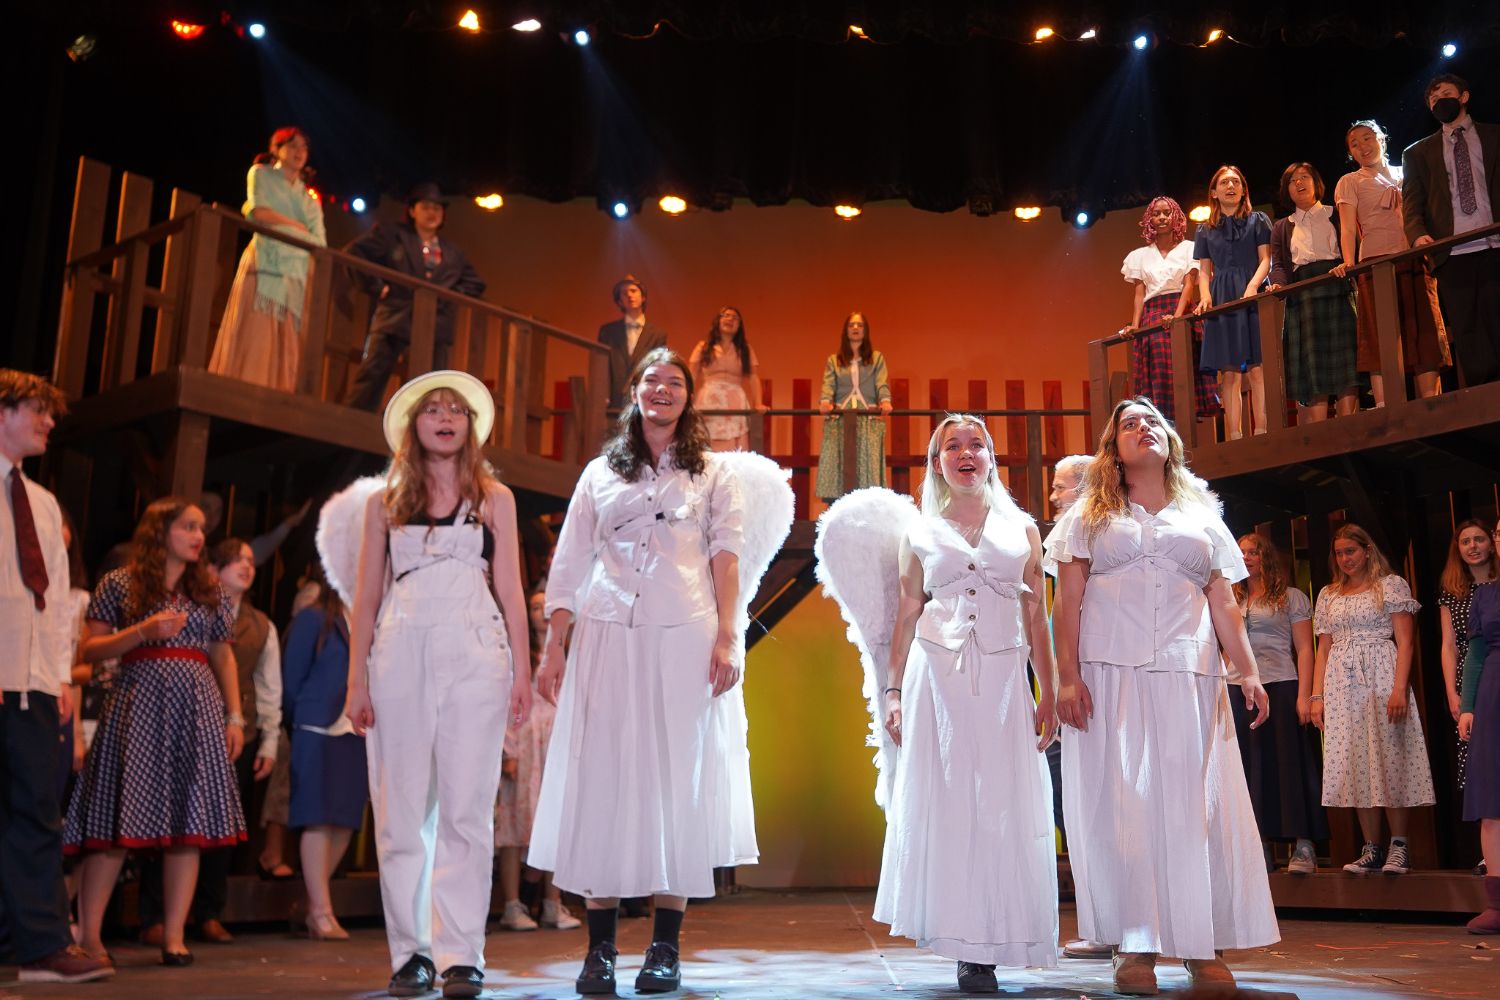 PHOTO: Emiko Essmiller | The South Pasadenan | Victoria Abelev, Sophia Swallow, Lucia Benning, Milla Sanchez-Regalado and the cast of Bright Star on stage at South Pasadena High School's Anderson Auditorium.